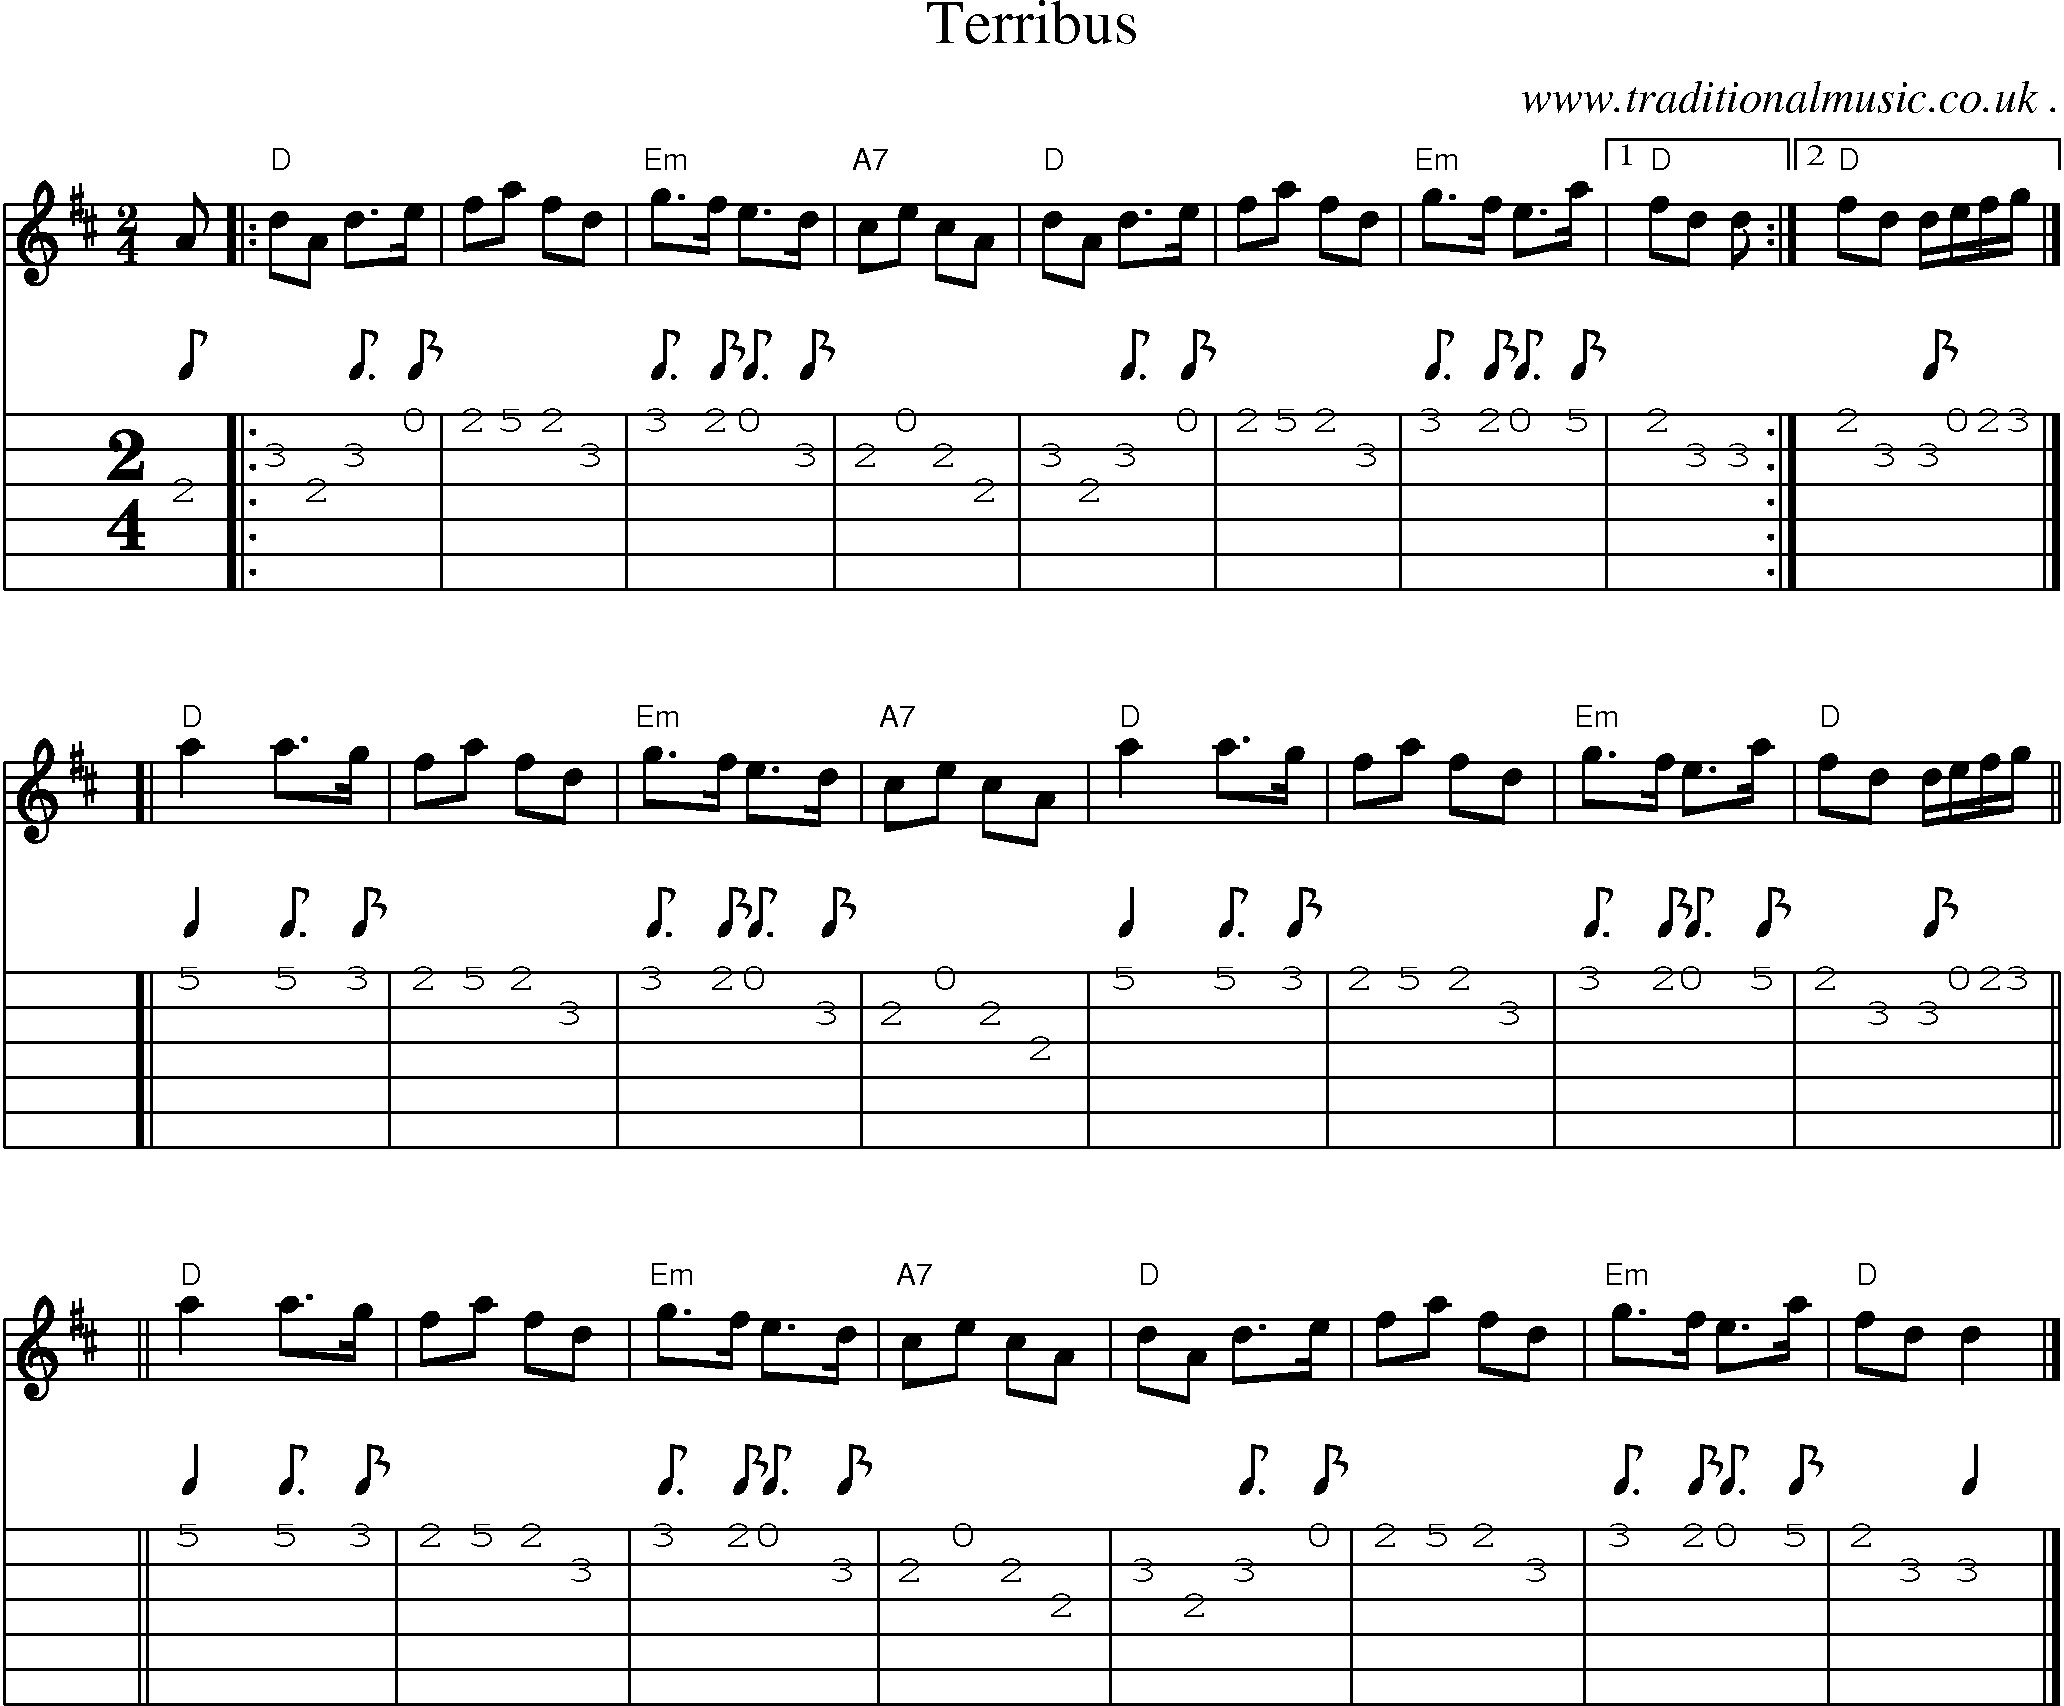 Sheet-music  score, Chords and Guitar Tabs for Terribus